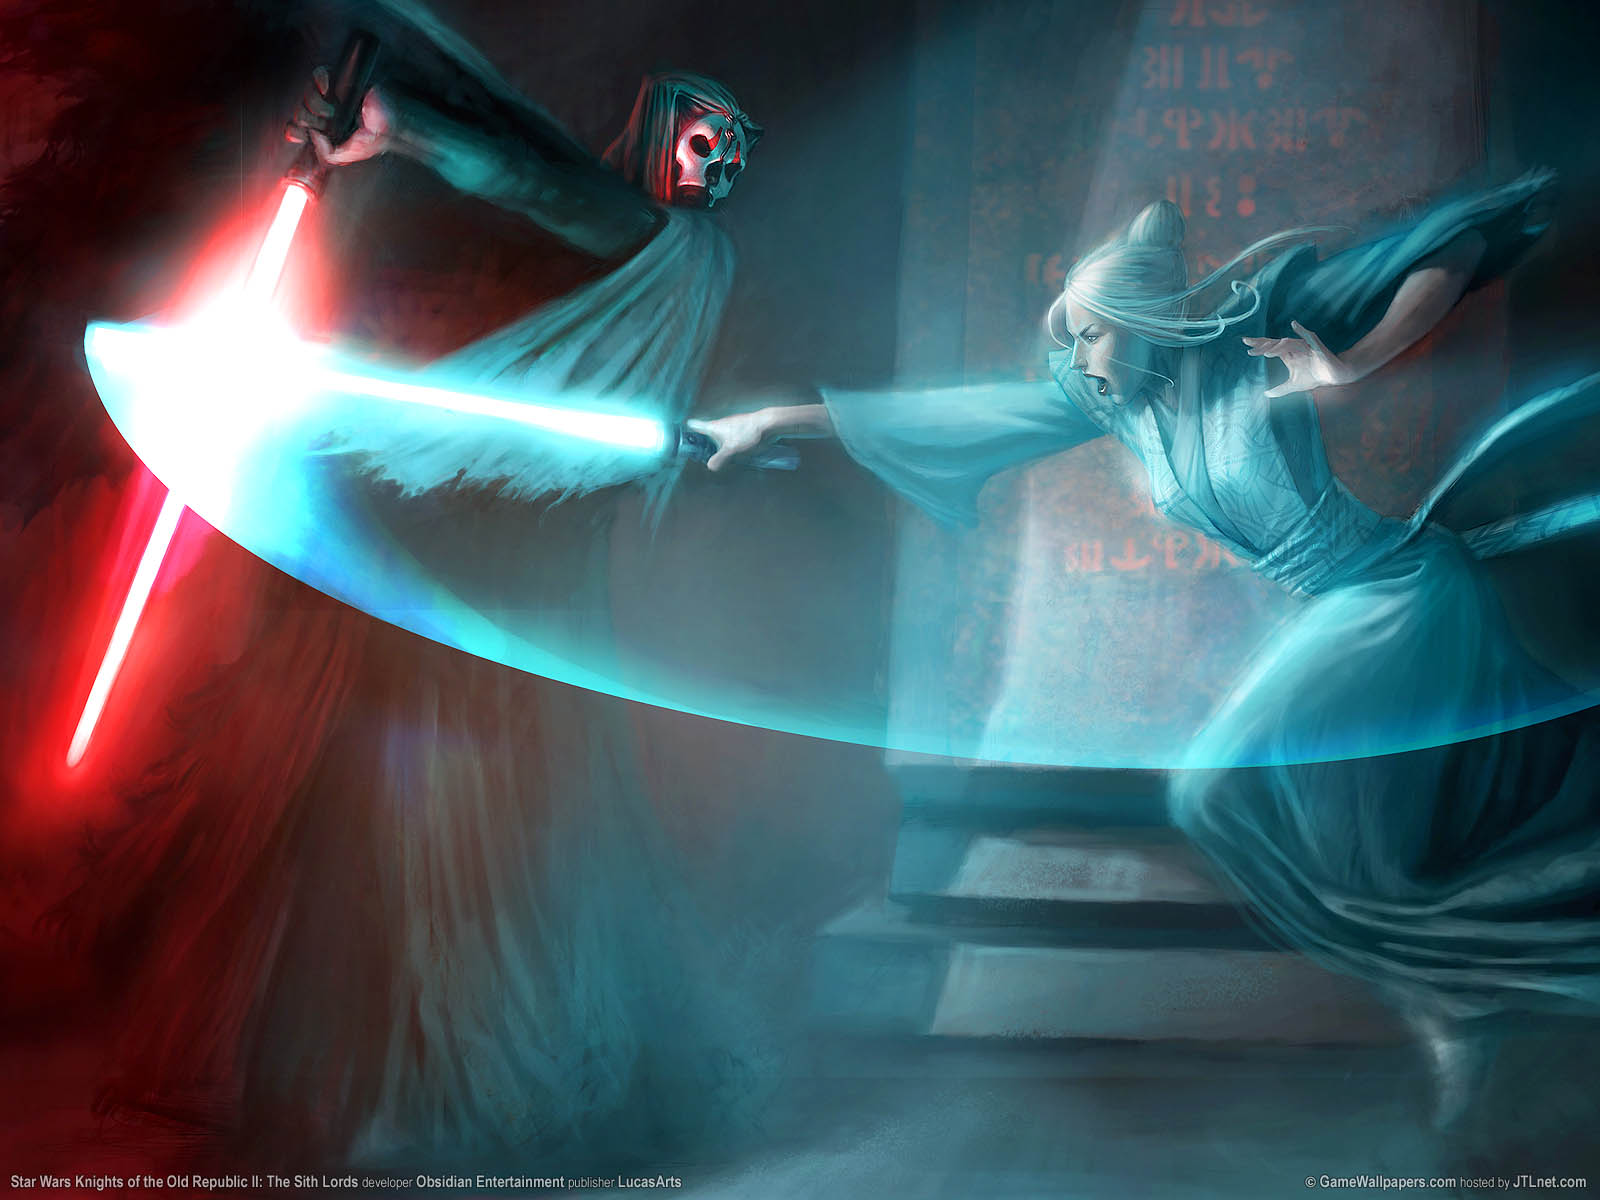 Star Wars%253A Knights of the Old Republic 2 wallpaper 02 1600x1200